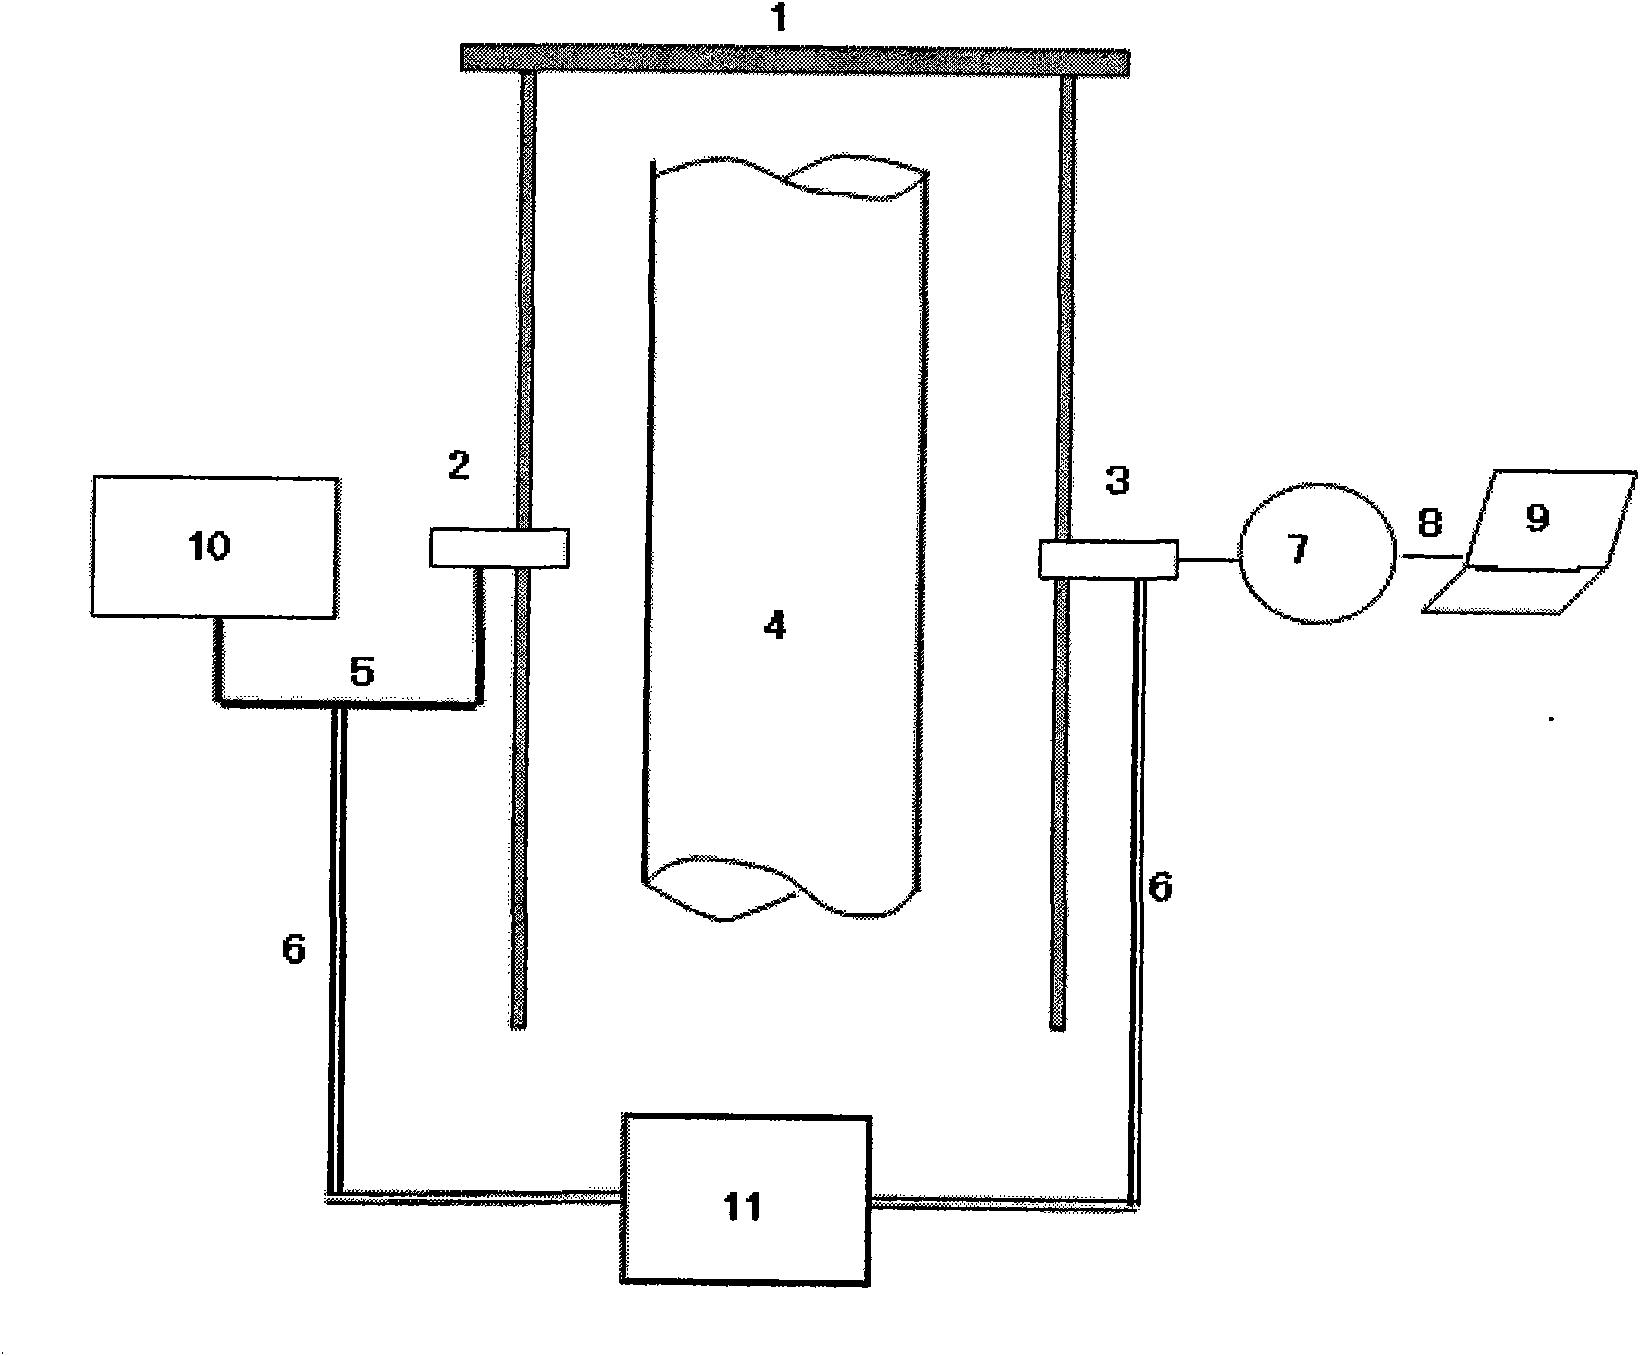 Device and method for testing density, concentration and thickness based on X-ray